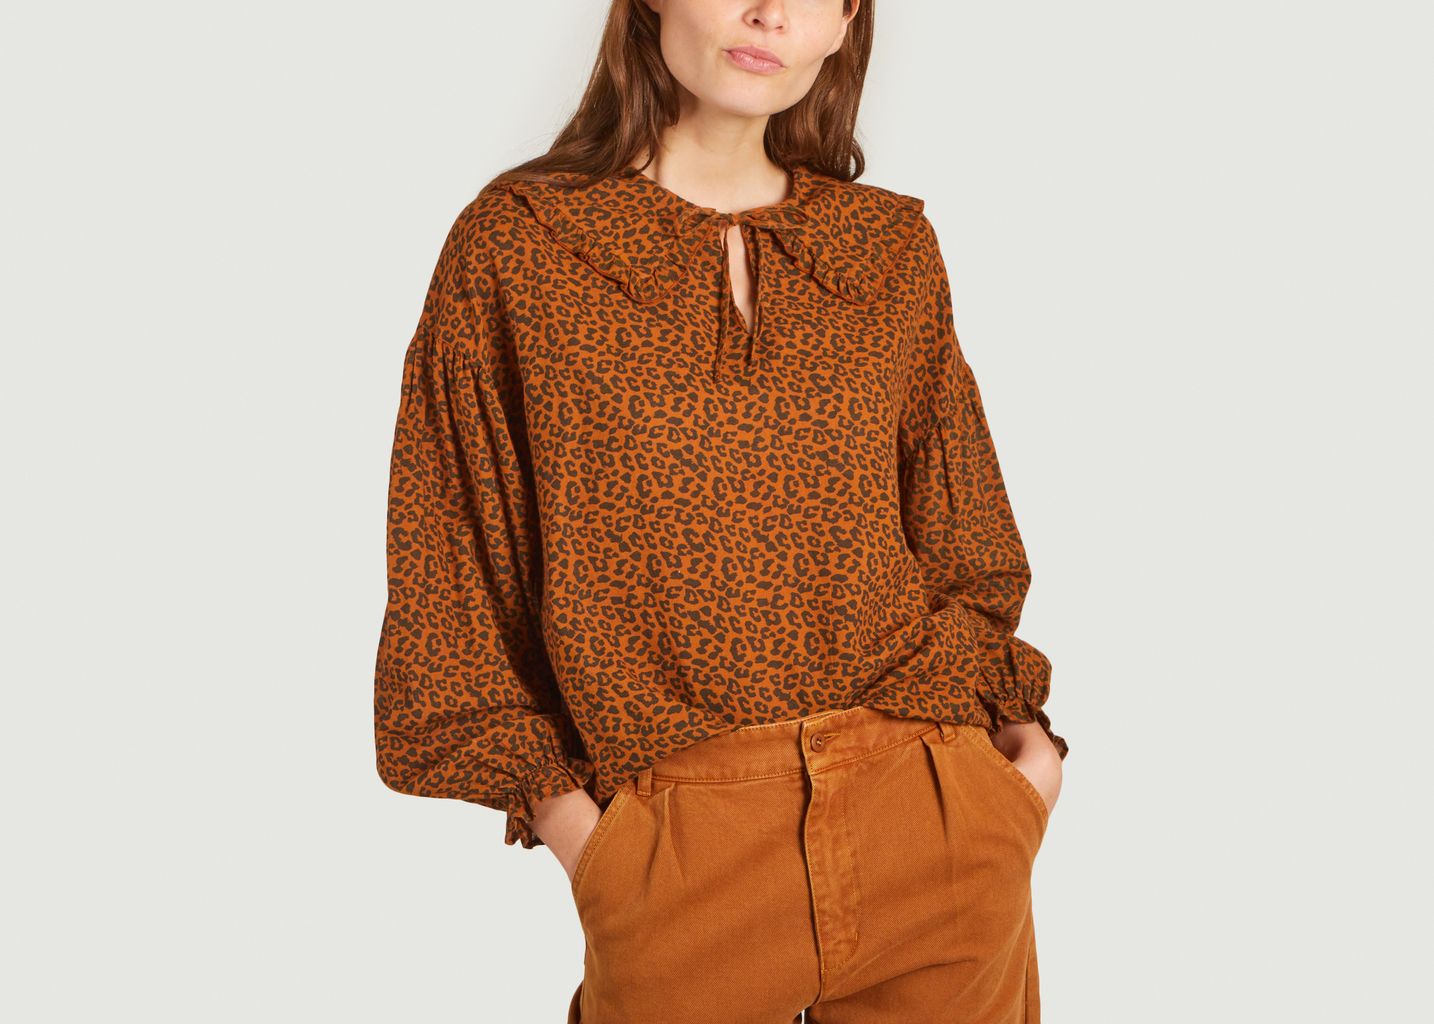 The New Society Oversized Leopard Print Blouse Federica